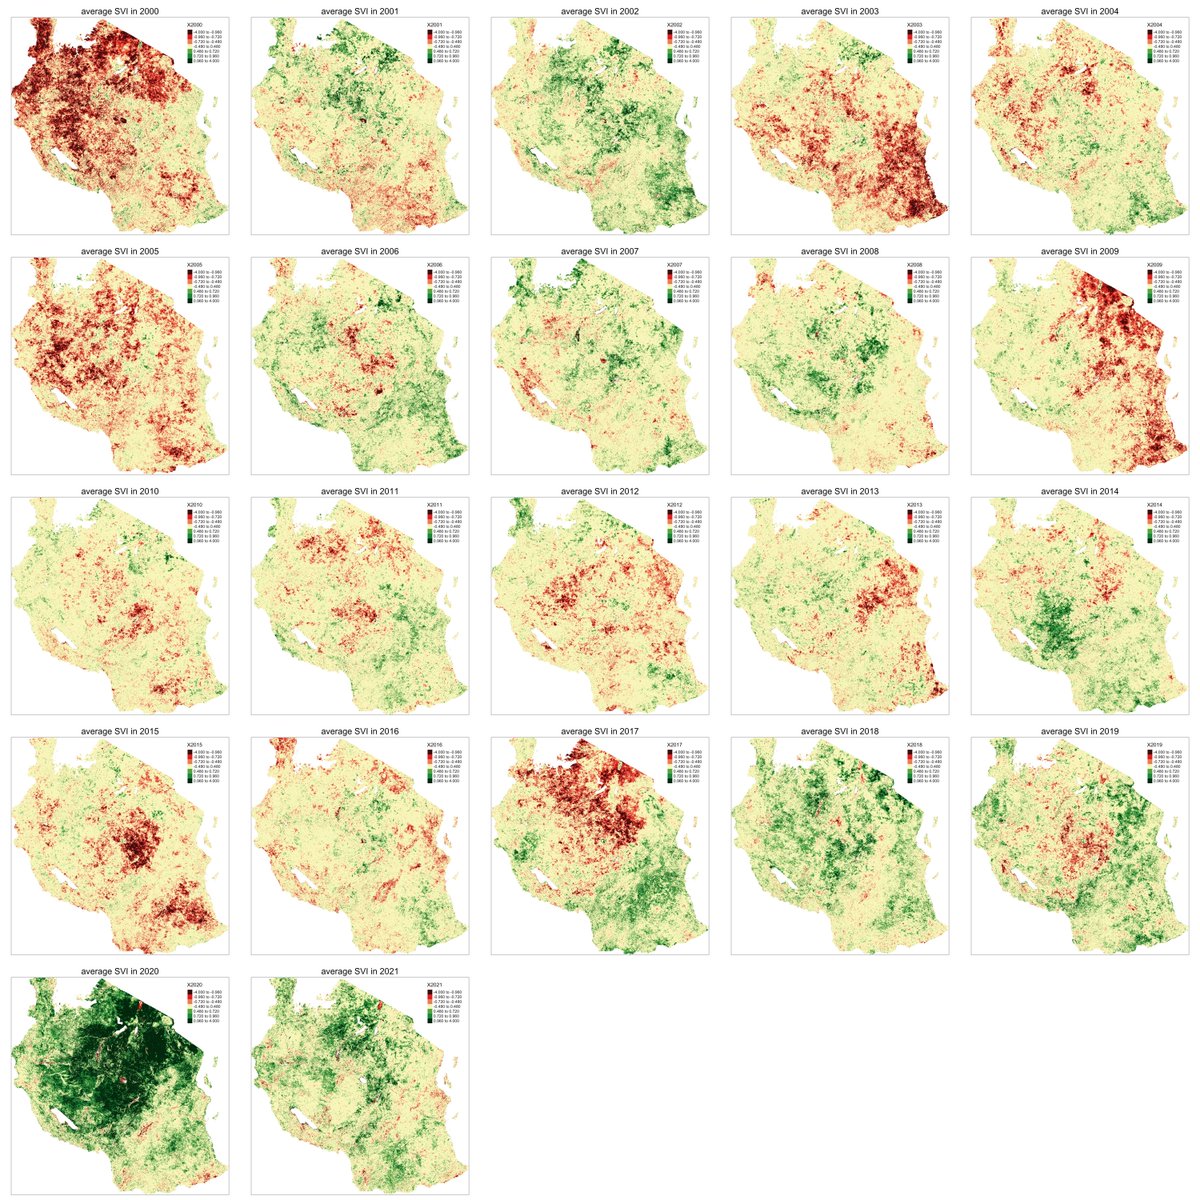 #30DayMapChallenge 
Day 8: Africa

Standardized Vegetation Index (SVI) is an index of the relative vegetation condition compared to the years being analyzed based on NDVI.

Here's a map of SVI in Tanzania between 2000 and 2021.